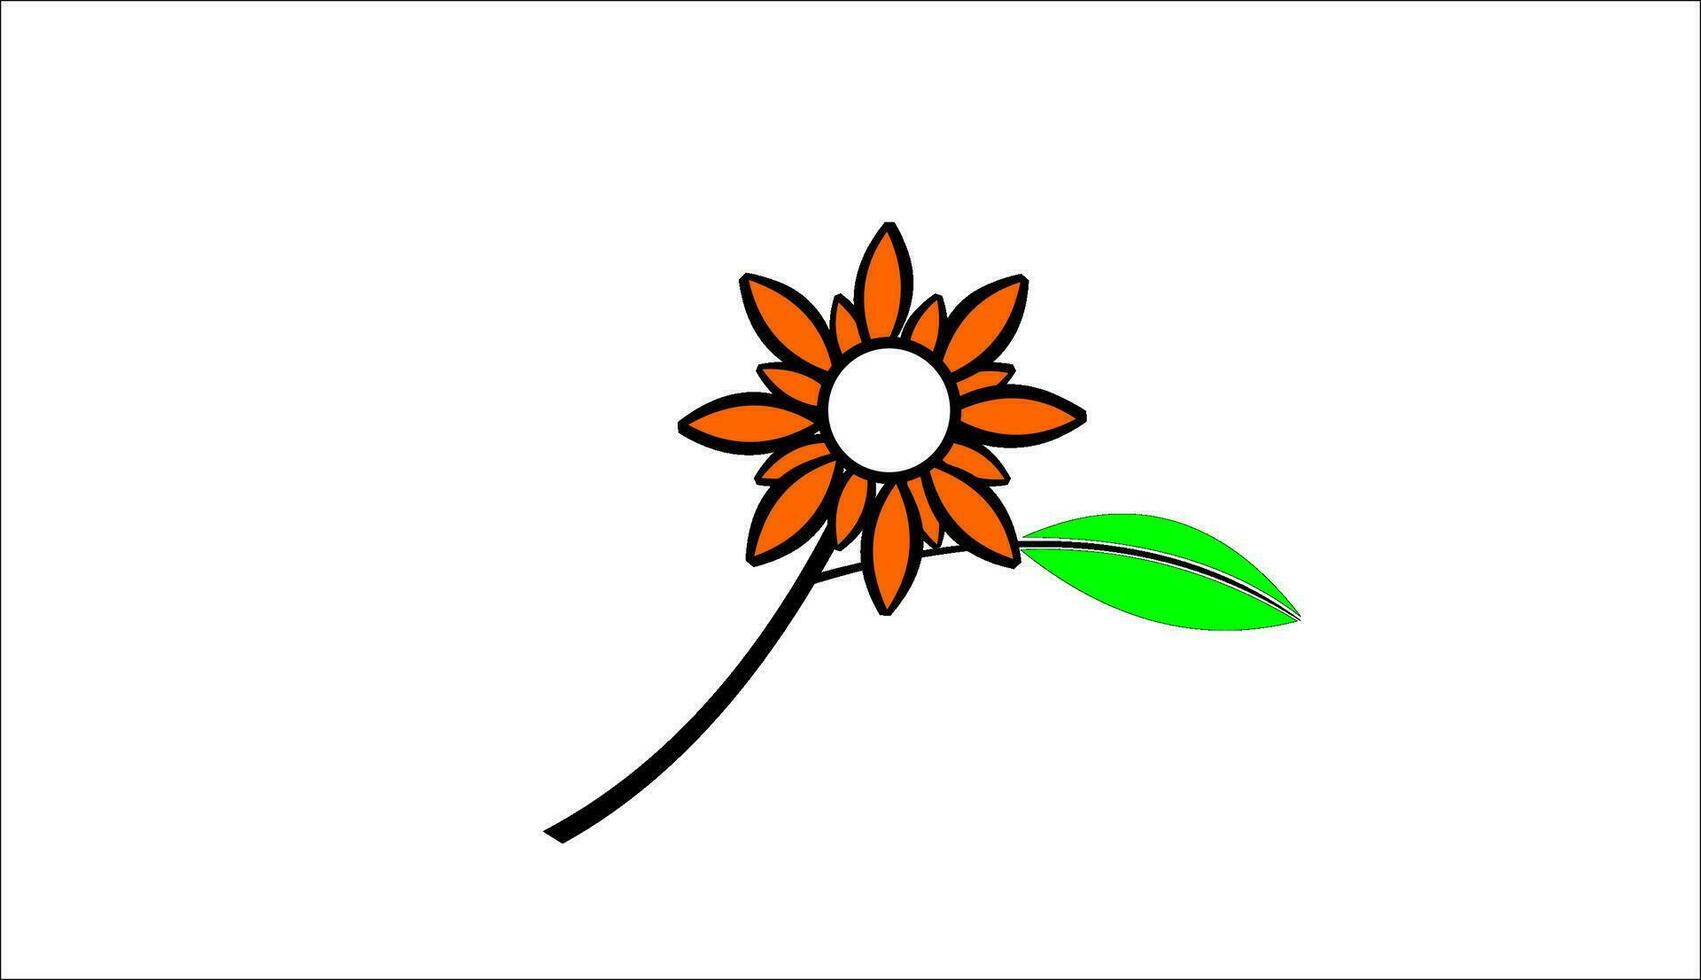 a vector image or flower icon